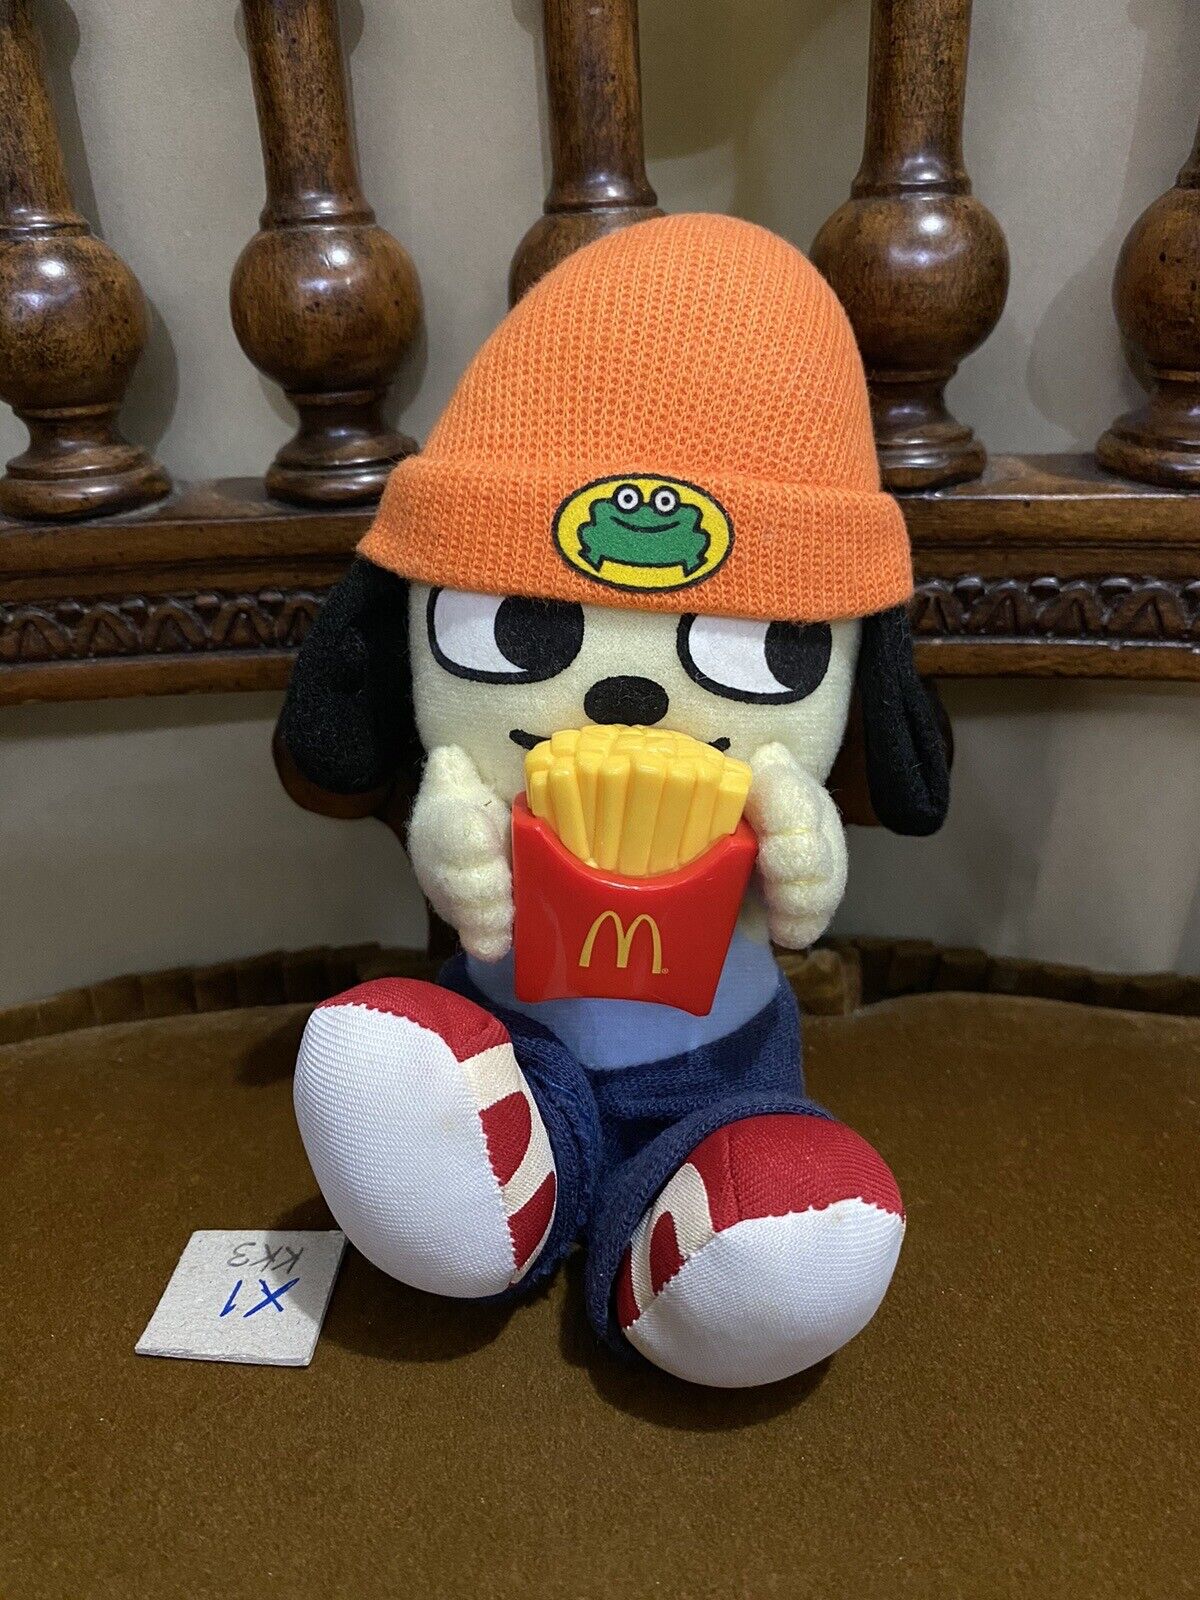 PaRappa the Rapper 5” Plush Doll Toy McDonald’s Sony